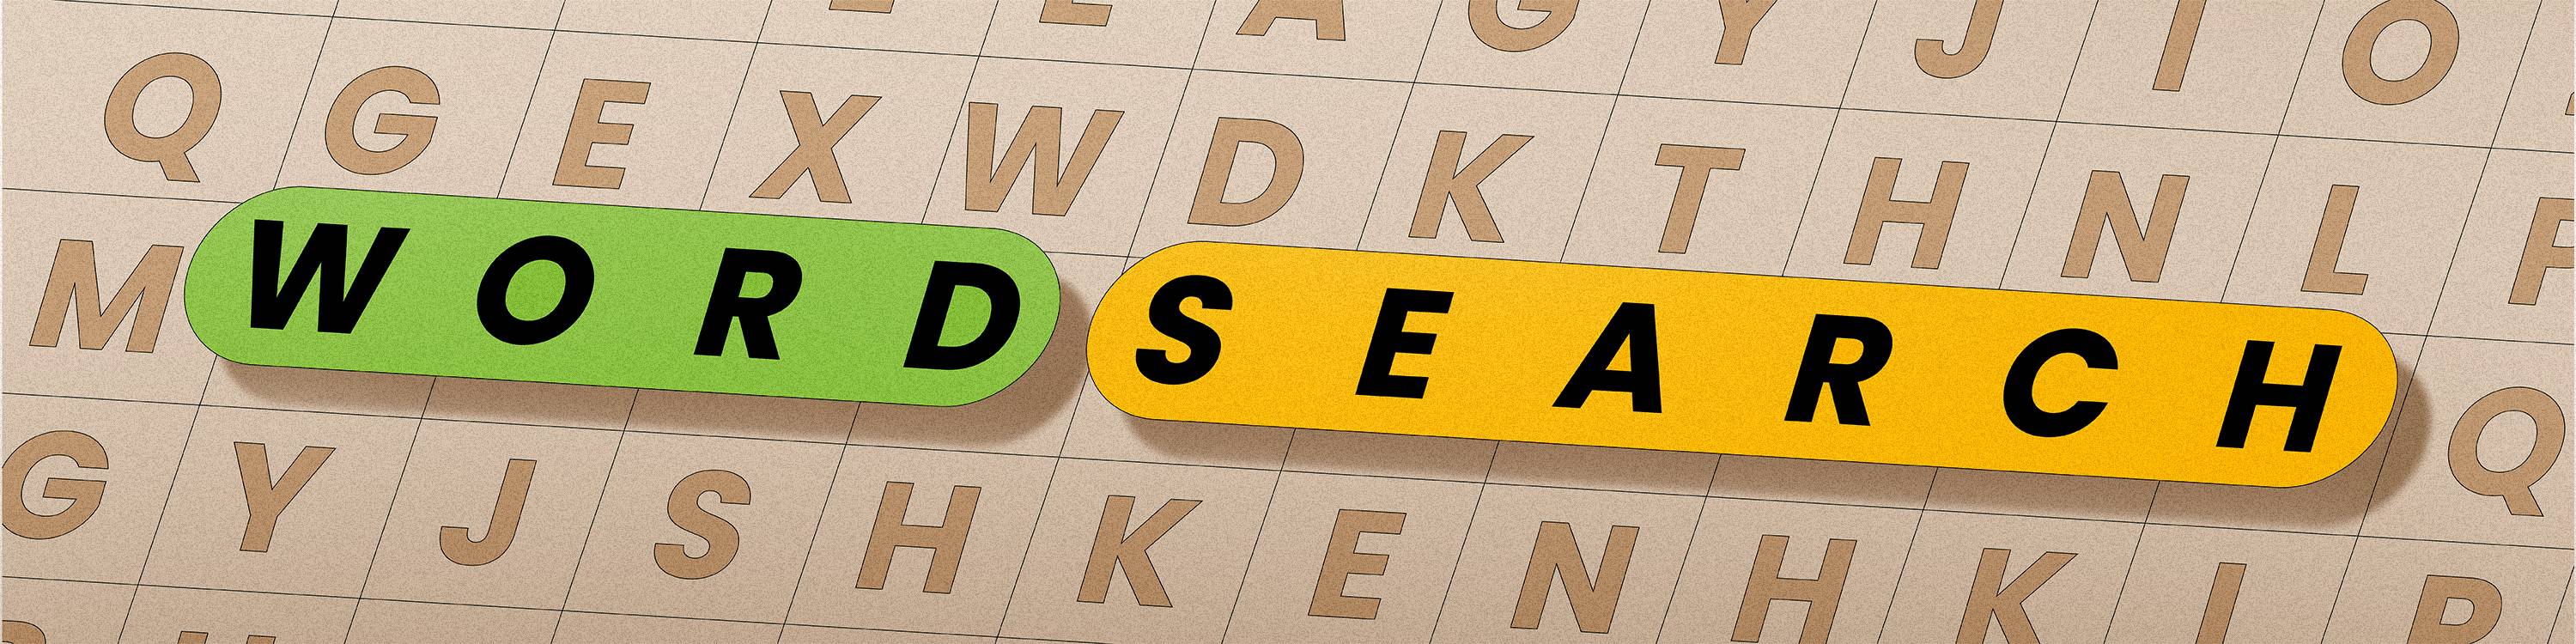 Word Search banner 